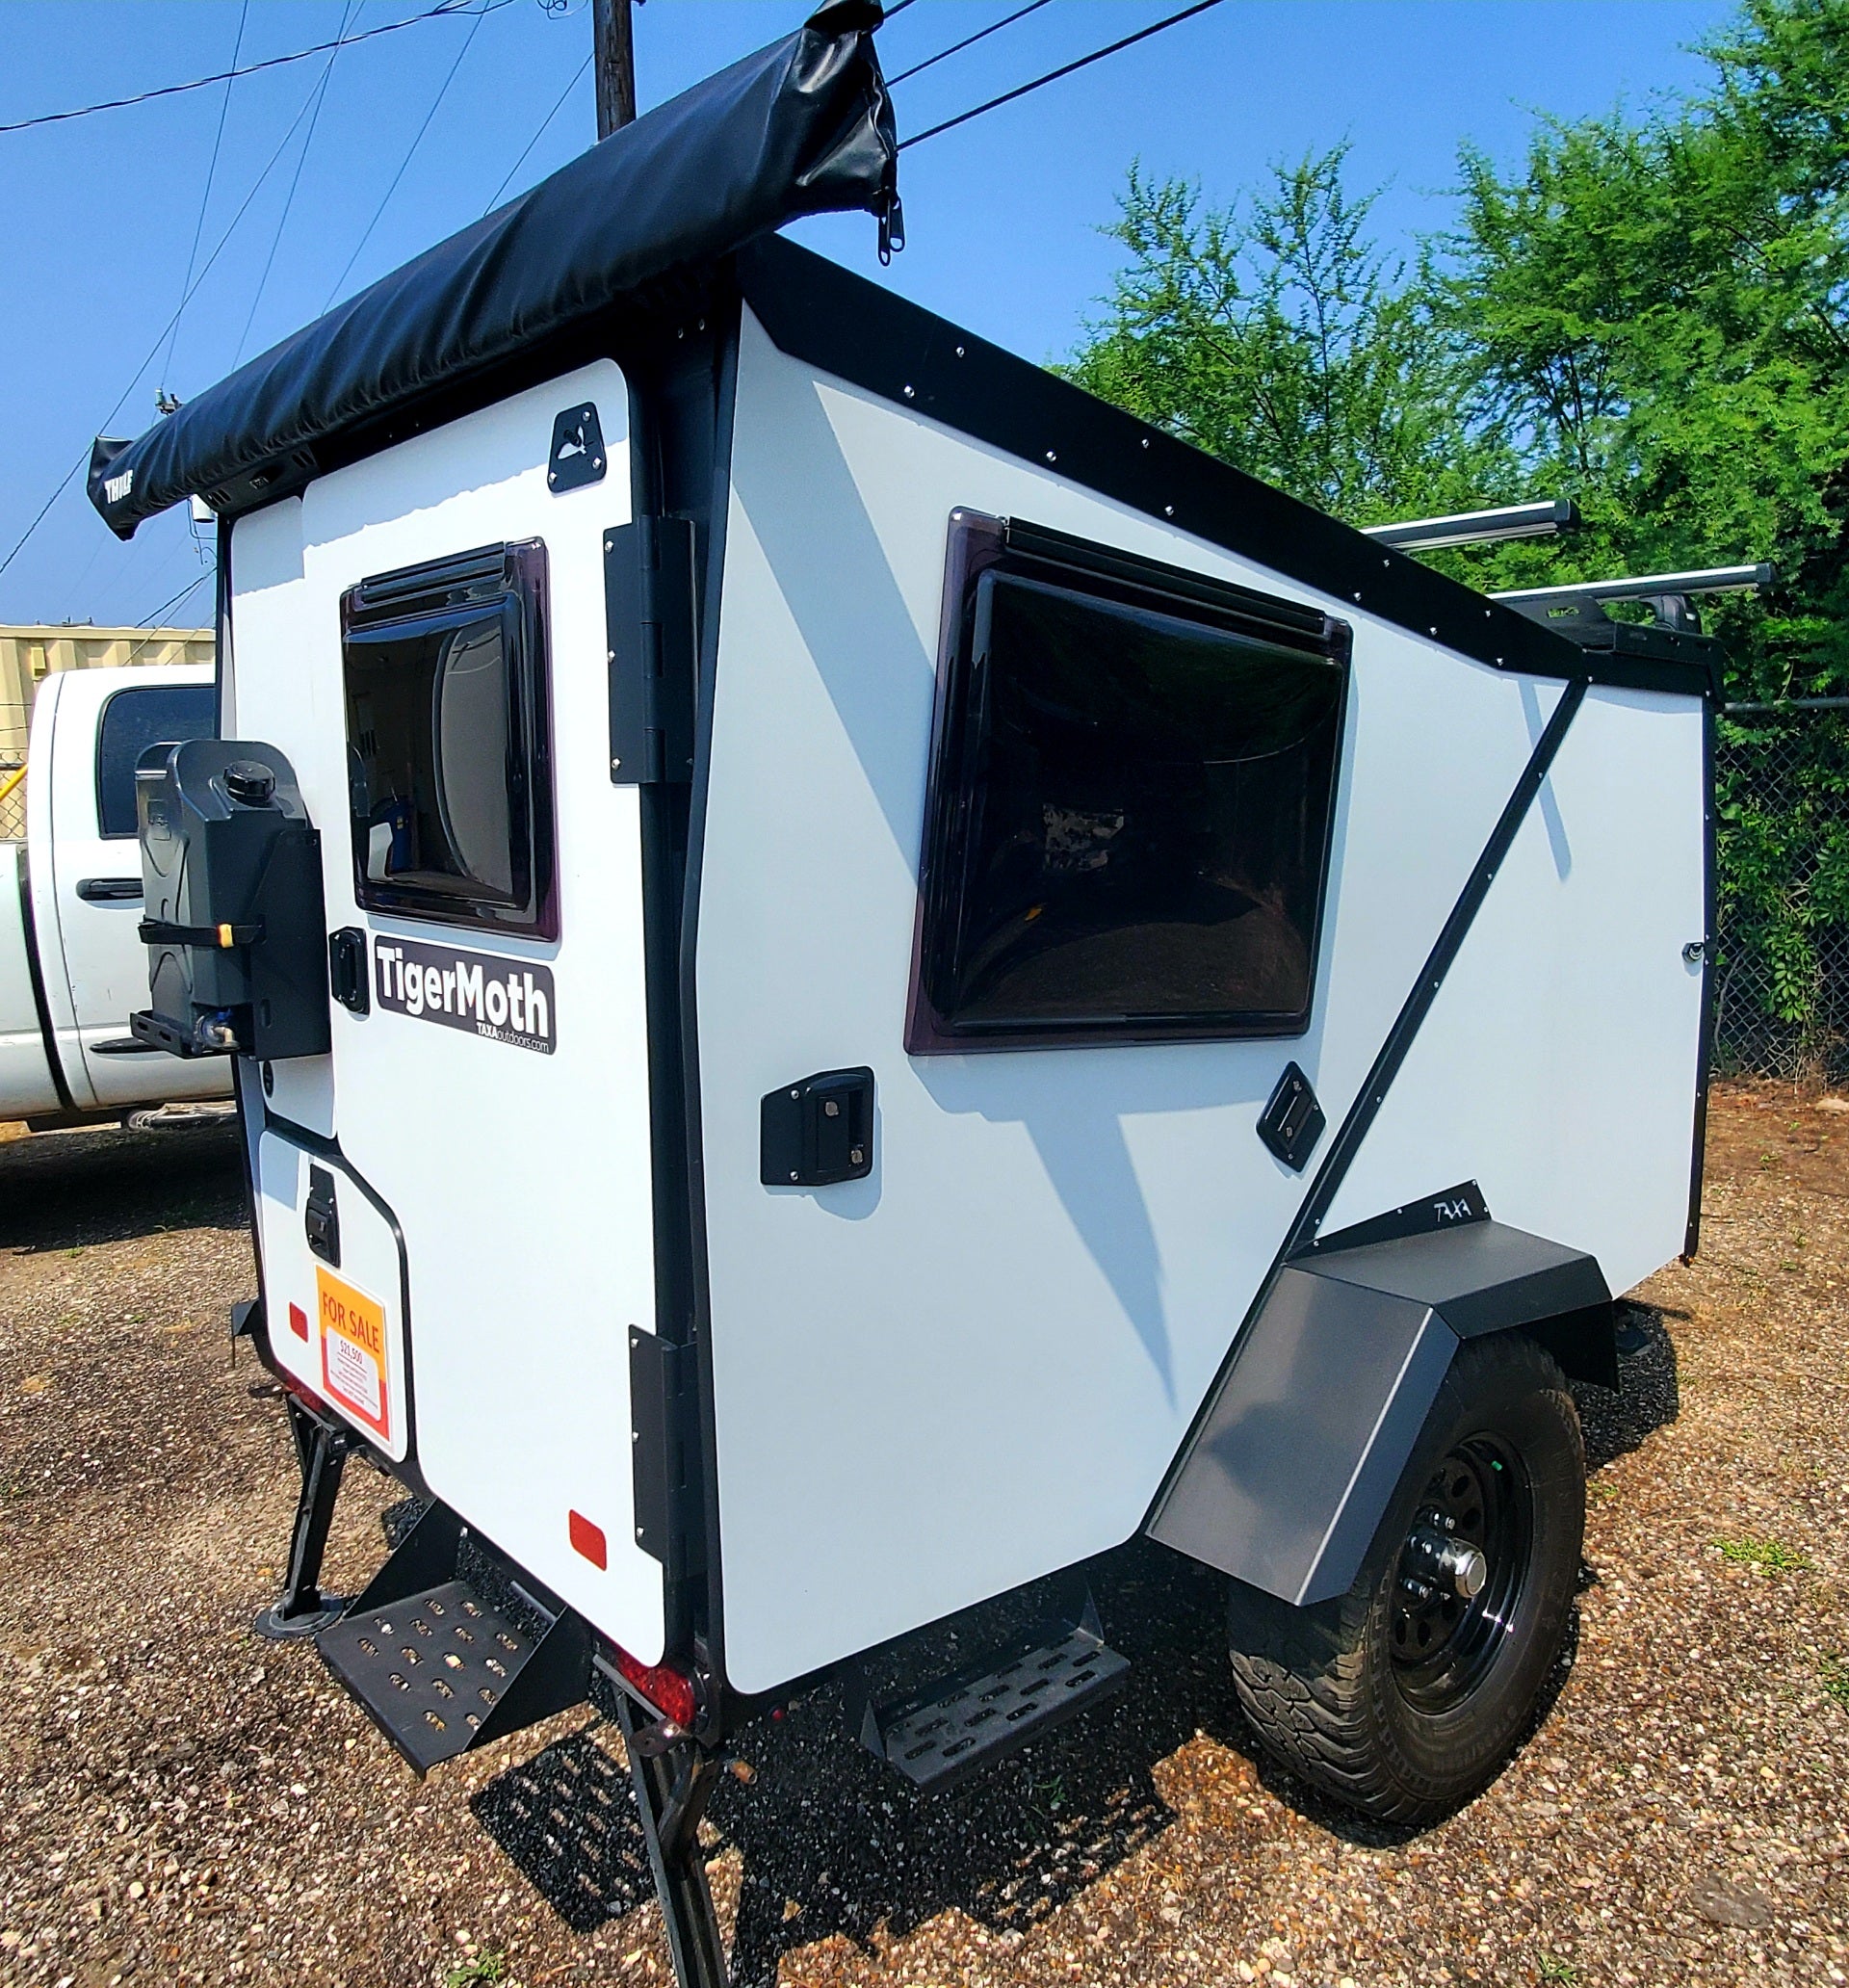 taxa outdoors standard tigermoth air condition offroad sleep inside trailer for sale near dallas fort worth texas at hawkes outdoors 2102512882